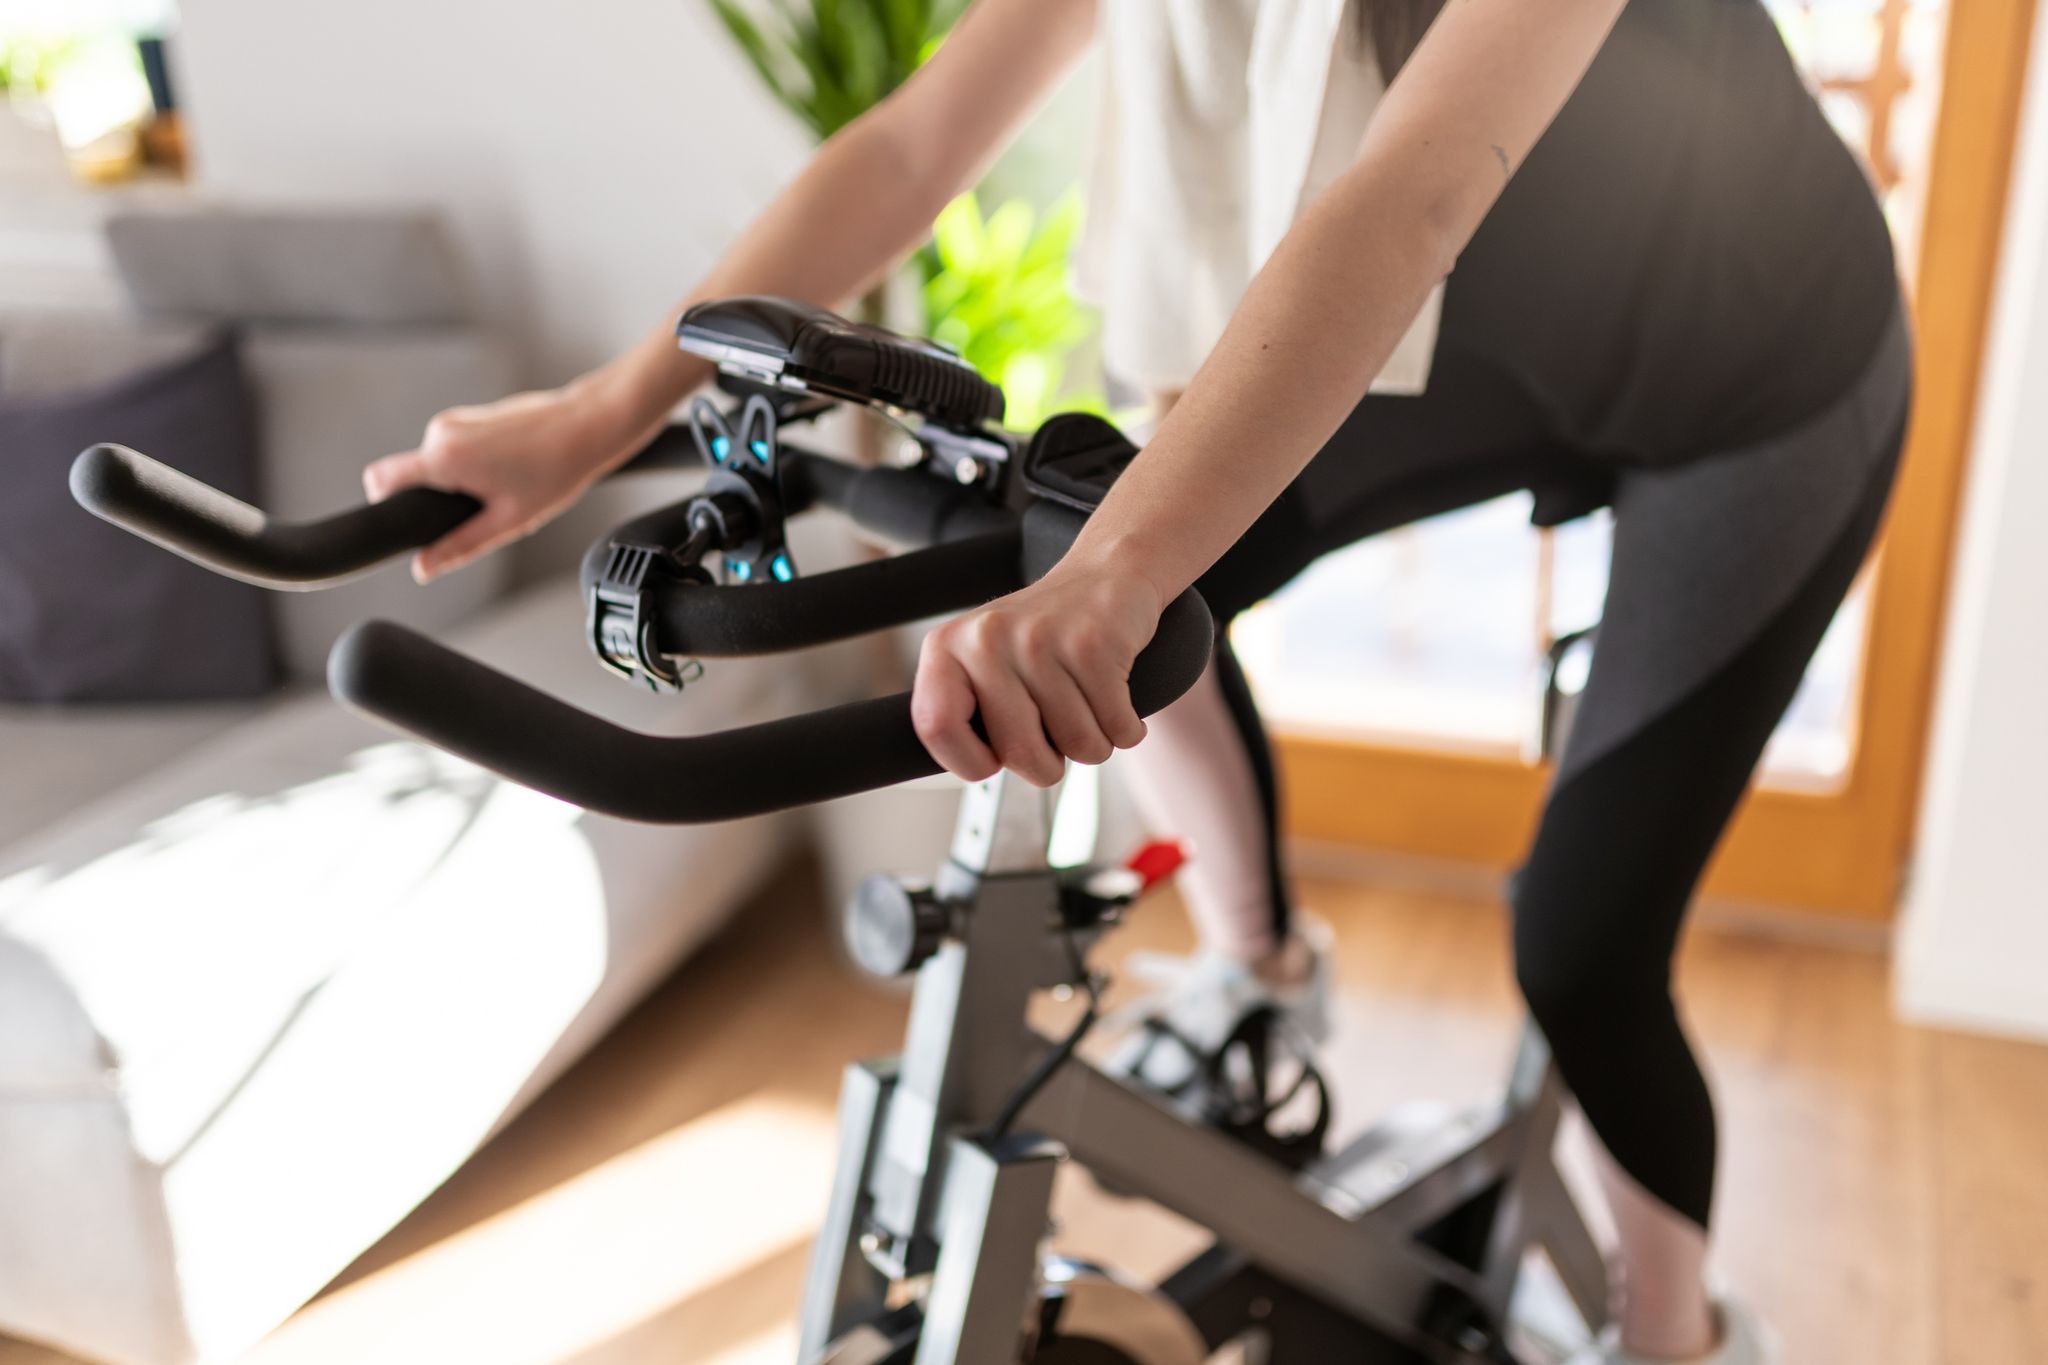 https://hips.hearstapps.com/hmg-prod/images/low-section-of-woman-training-on-exercise-bike-at-royalty-free-image-1612259972.?resize=2048:*